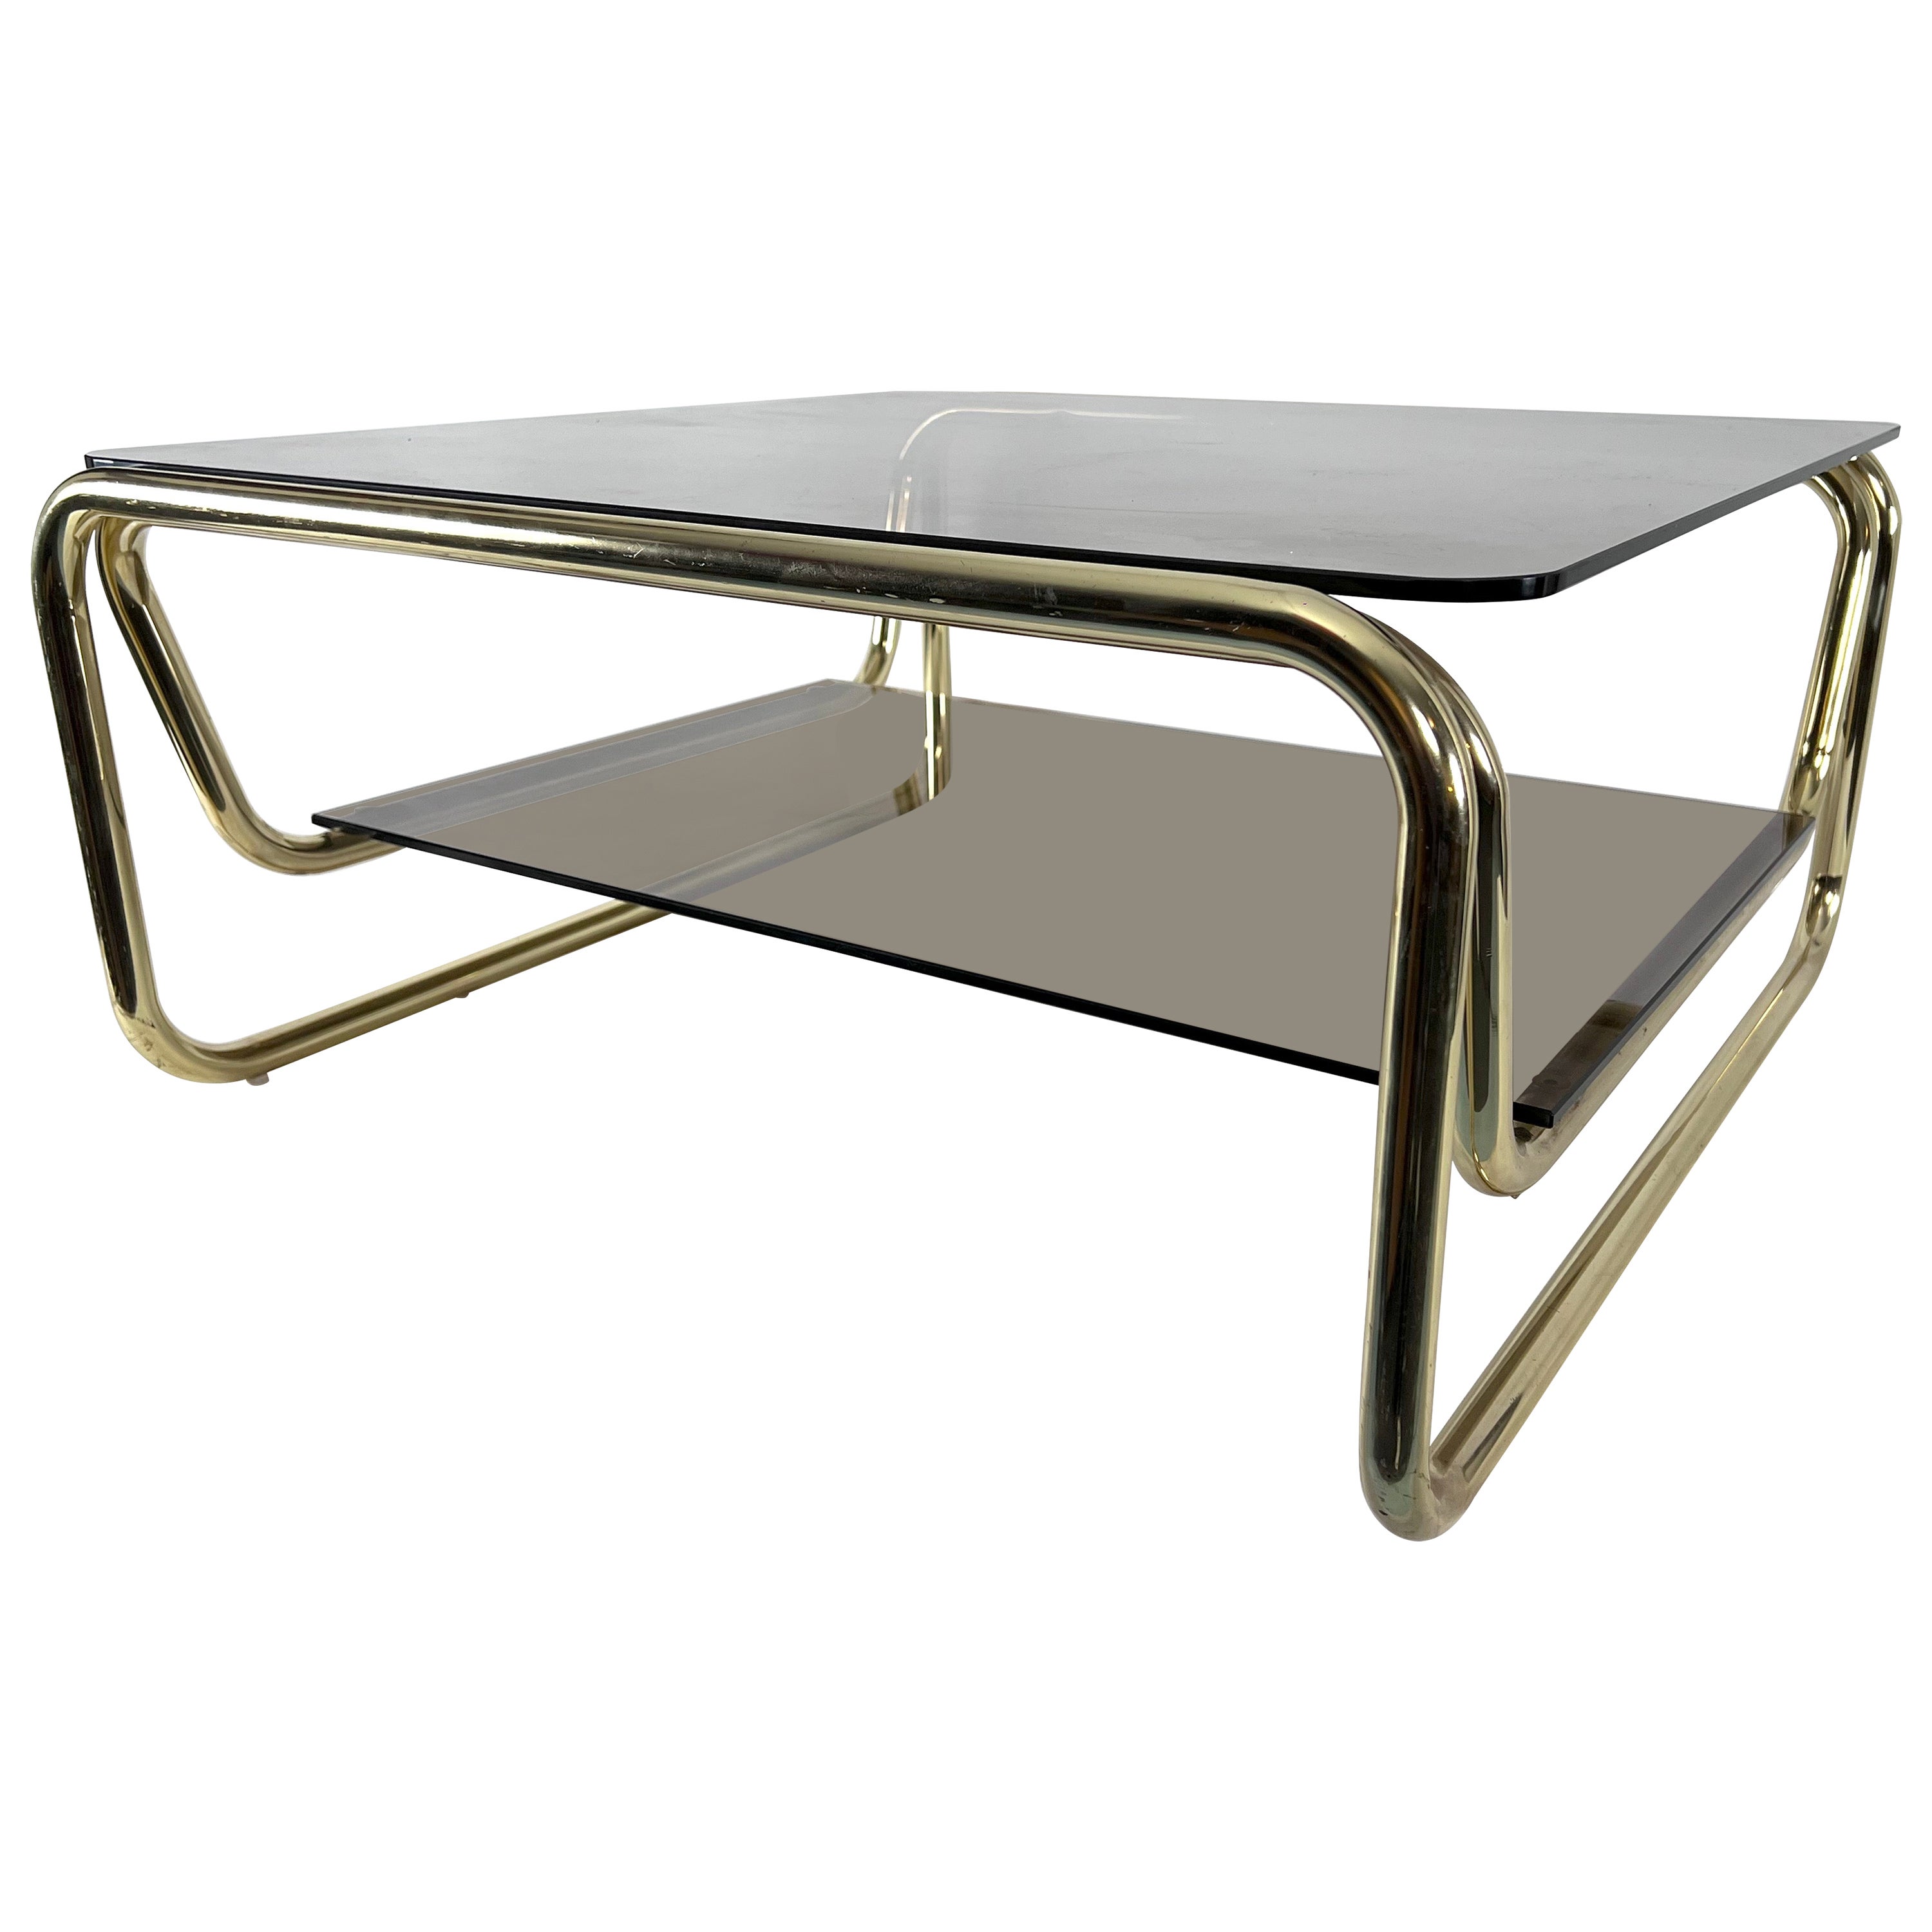 Vintage Italian Brass and Glass Coffee Table from 70s